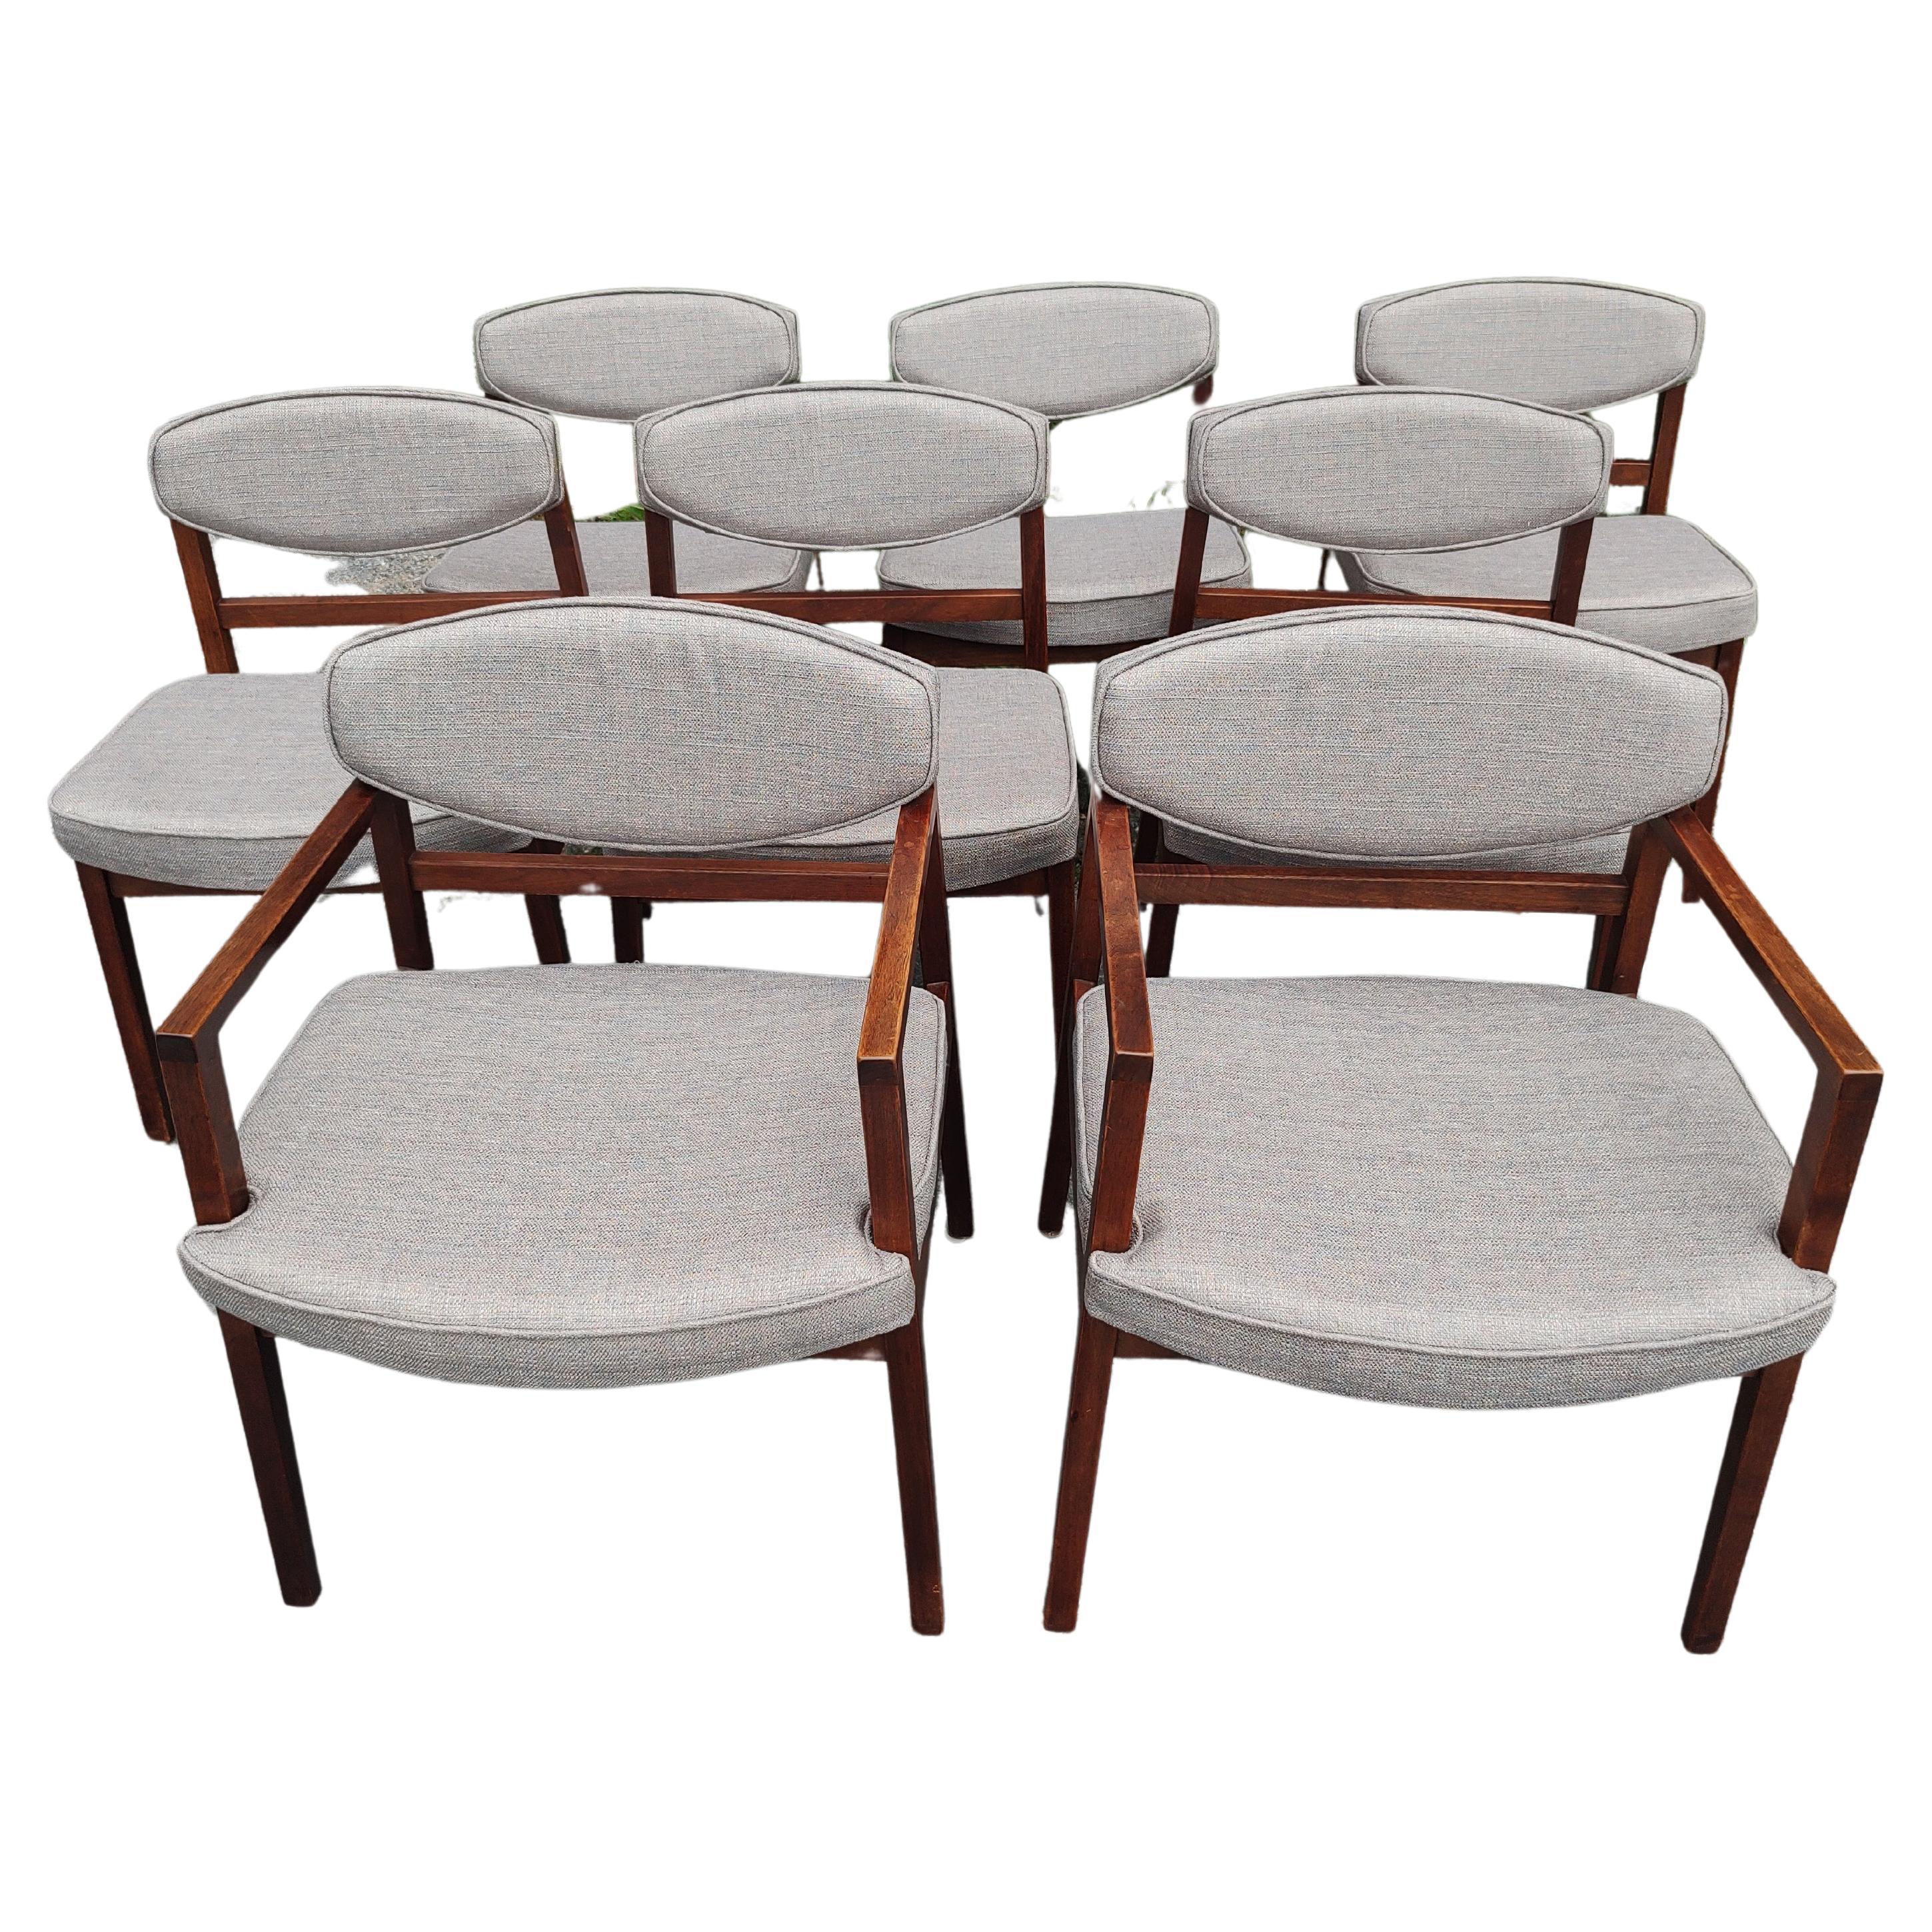 Mid-Century Modern Set of 8 Mid Century Modern Teak Dining Chairs by George Nelson - Herman Miller For Sale